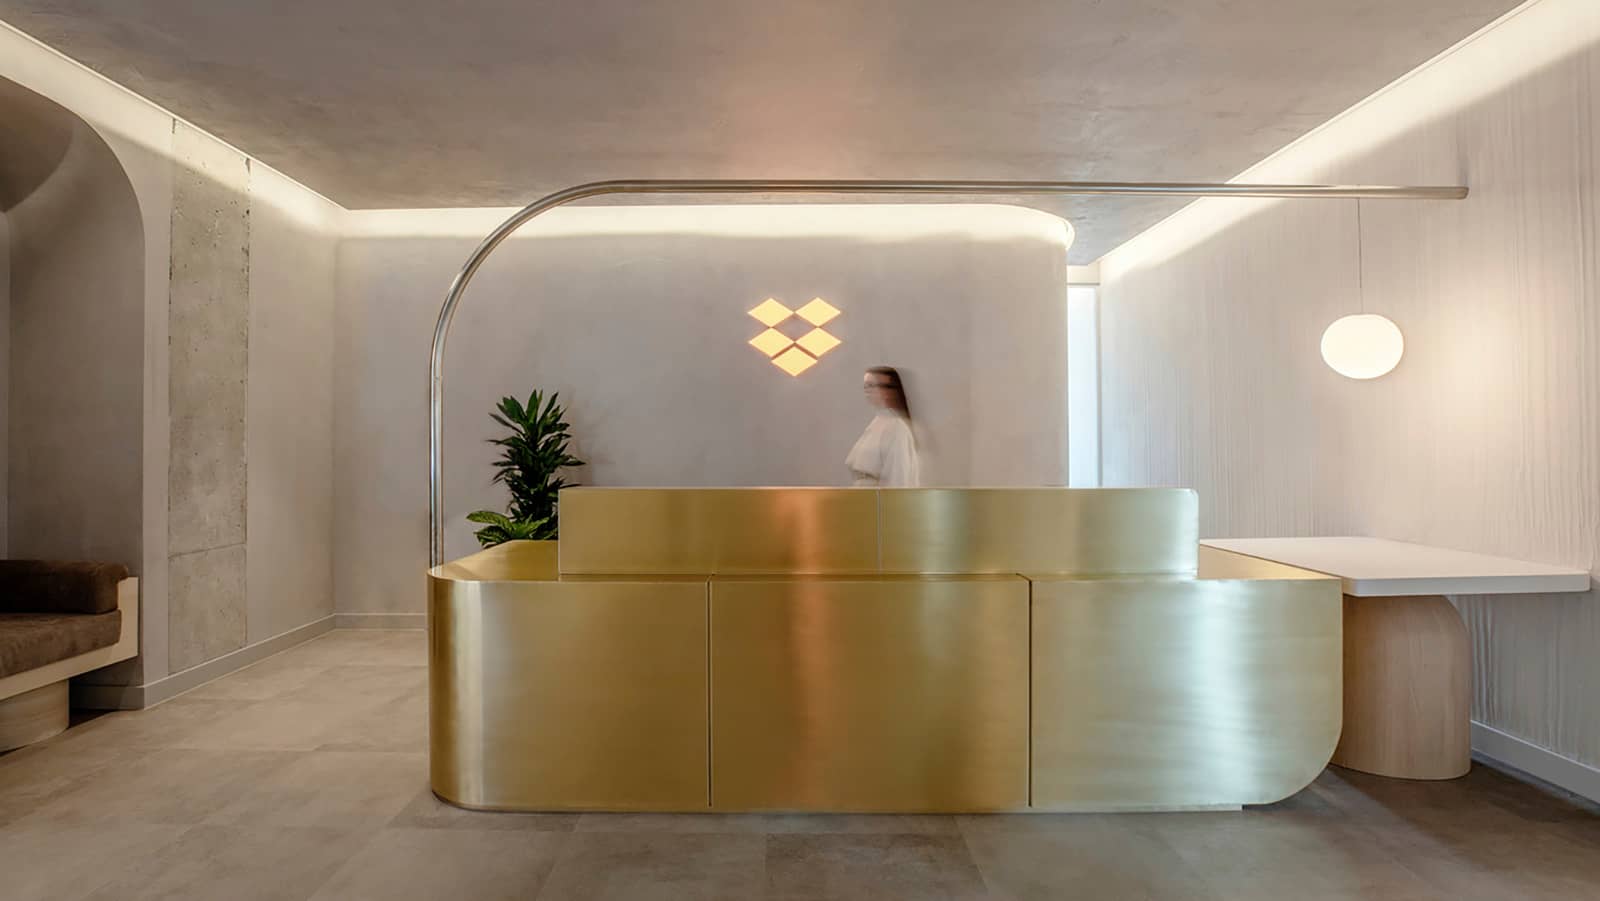 The reception area at Dropbox's Dublin offices featuring a golden reception desk, and rounded, white walls with a lit logo display.